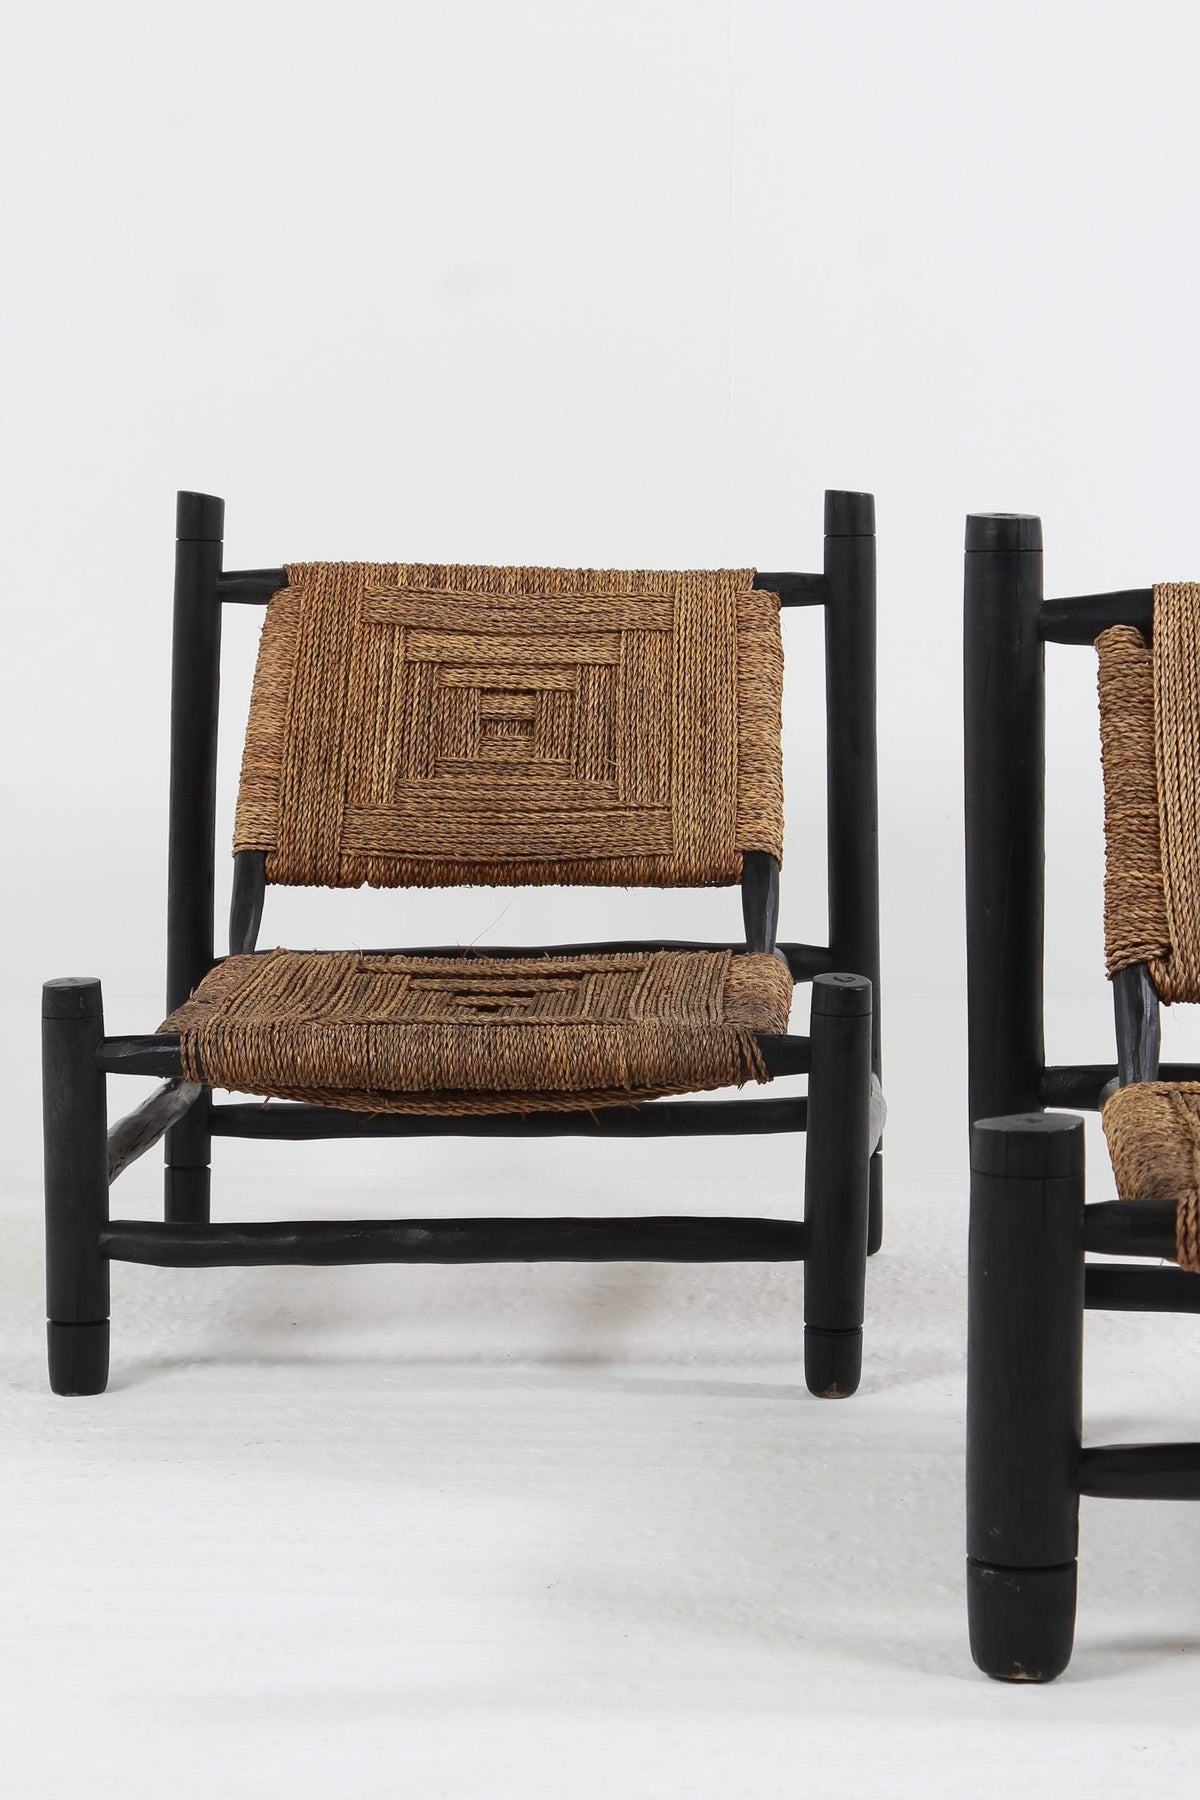 Pair of French Ebonised Wood & Rope Lounge Chairs